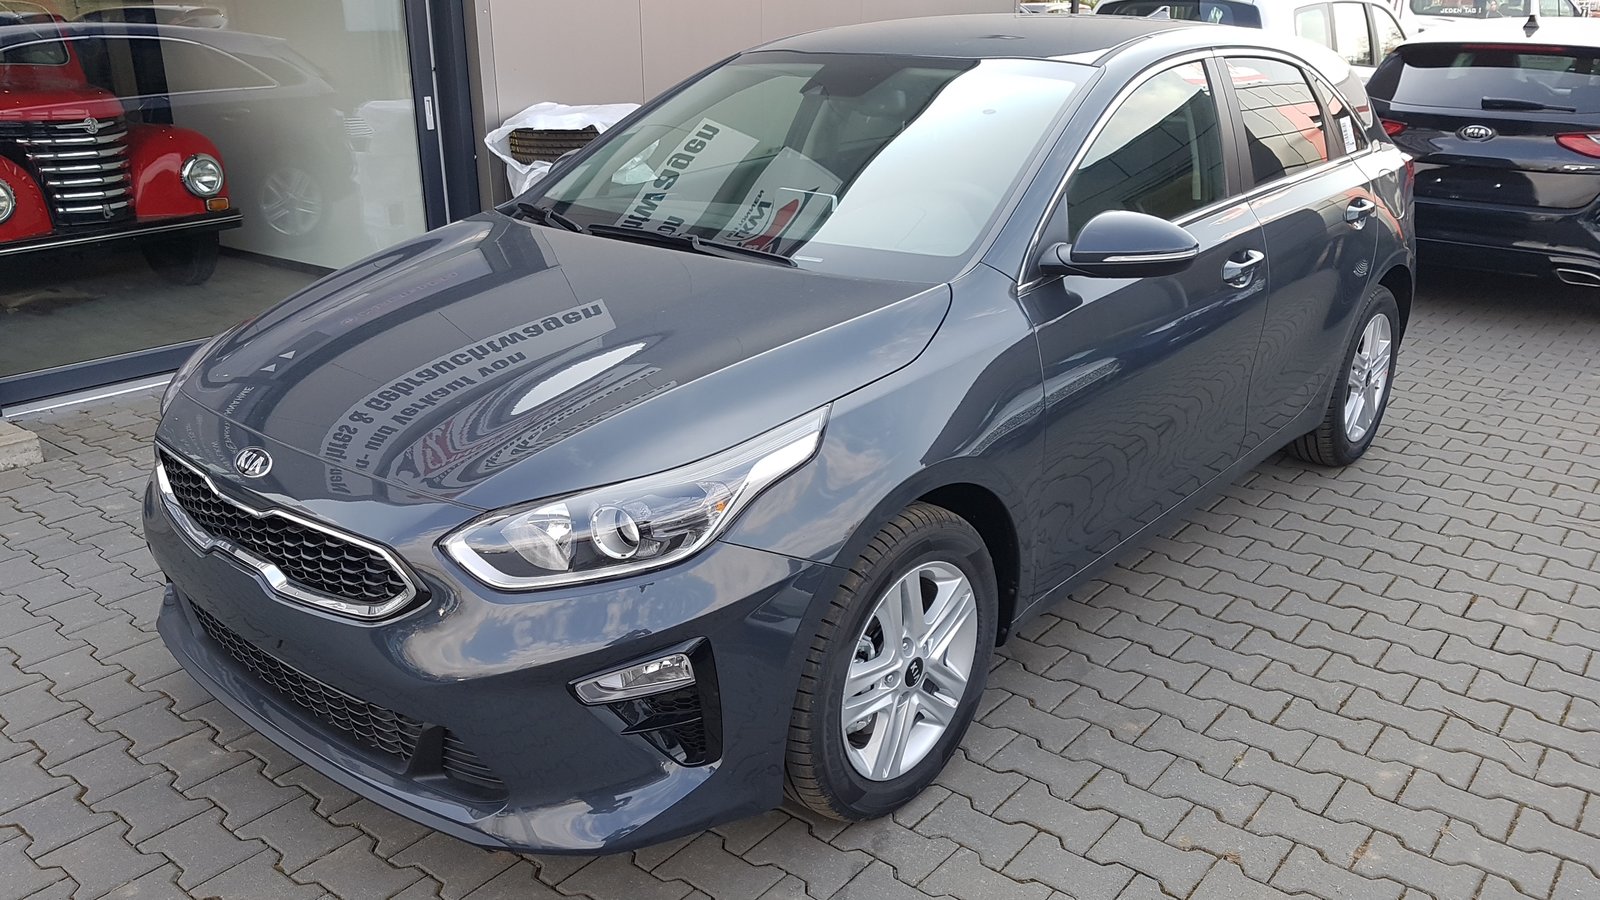 KIA CEED Cee'd Limo Kamera*Sitzheizung*App-Connect! Autosoft BV, Enschede